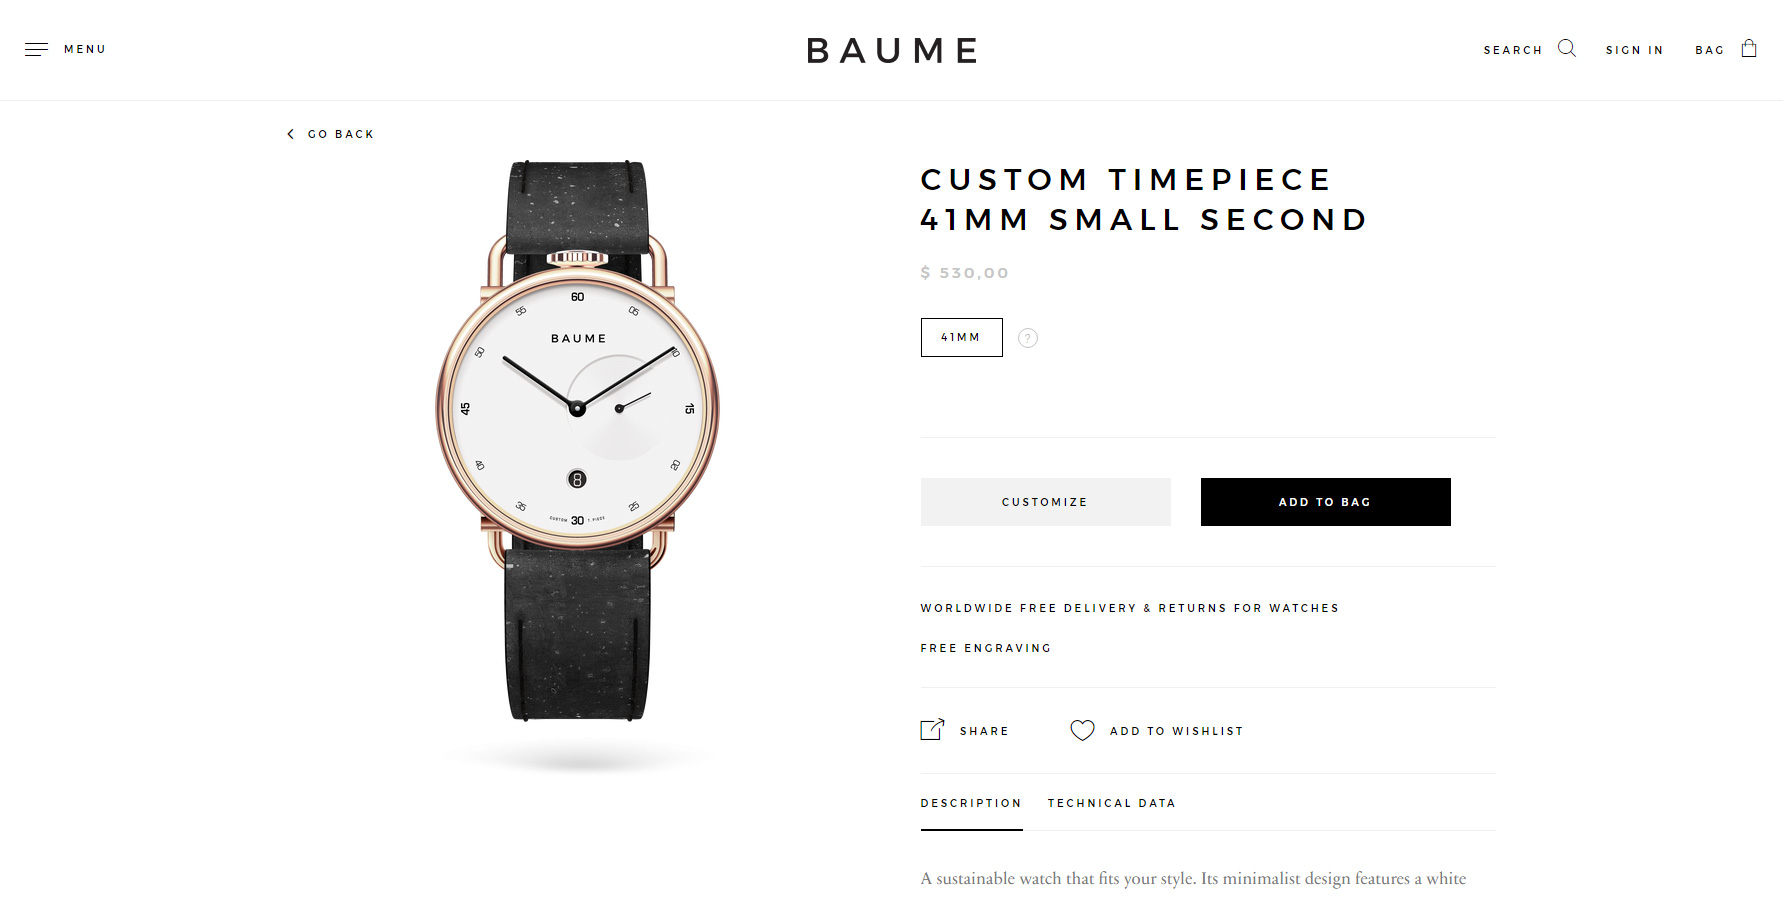 Baume - Website of the Day